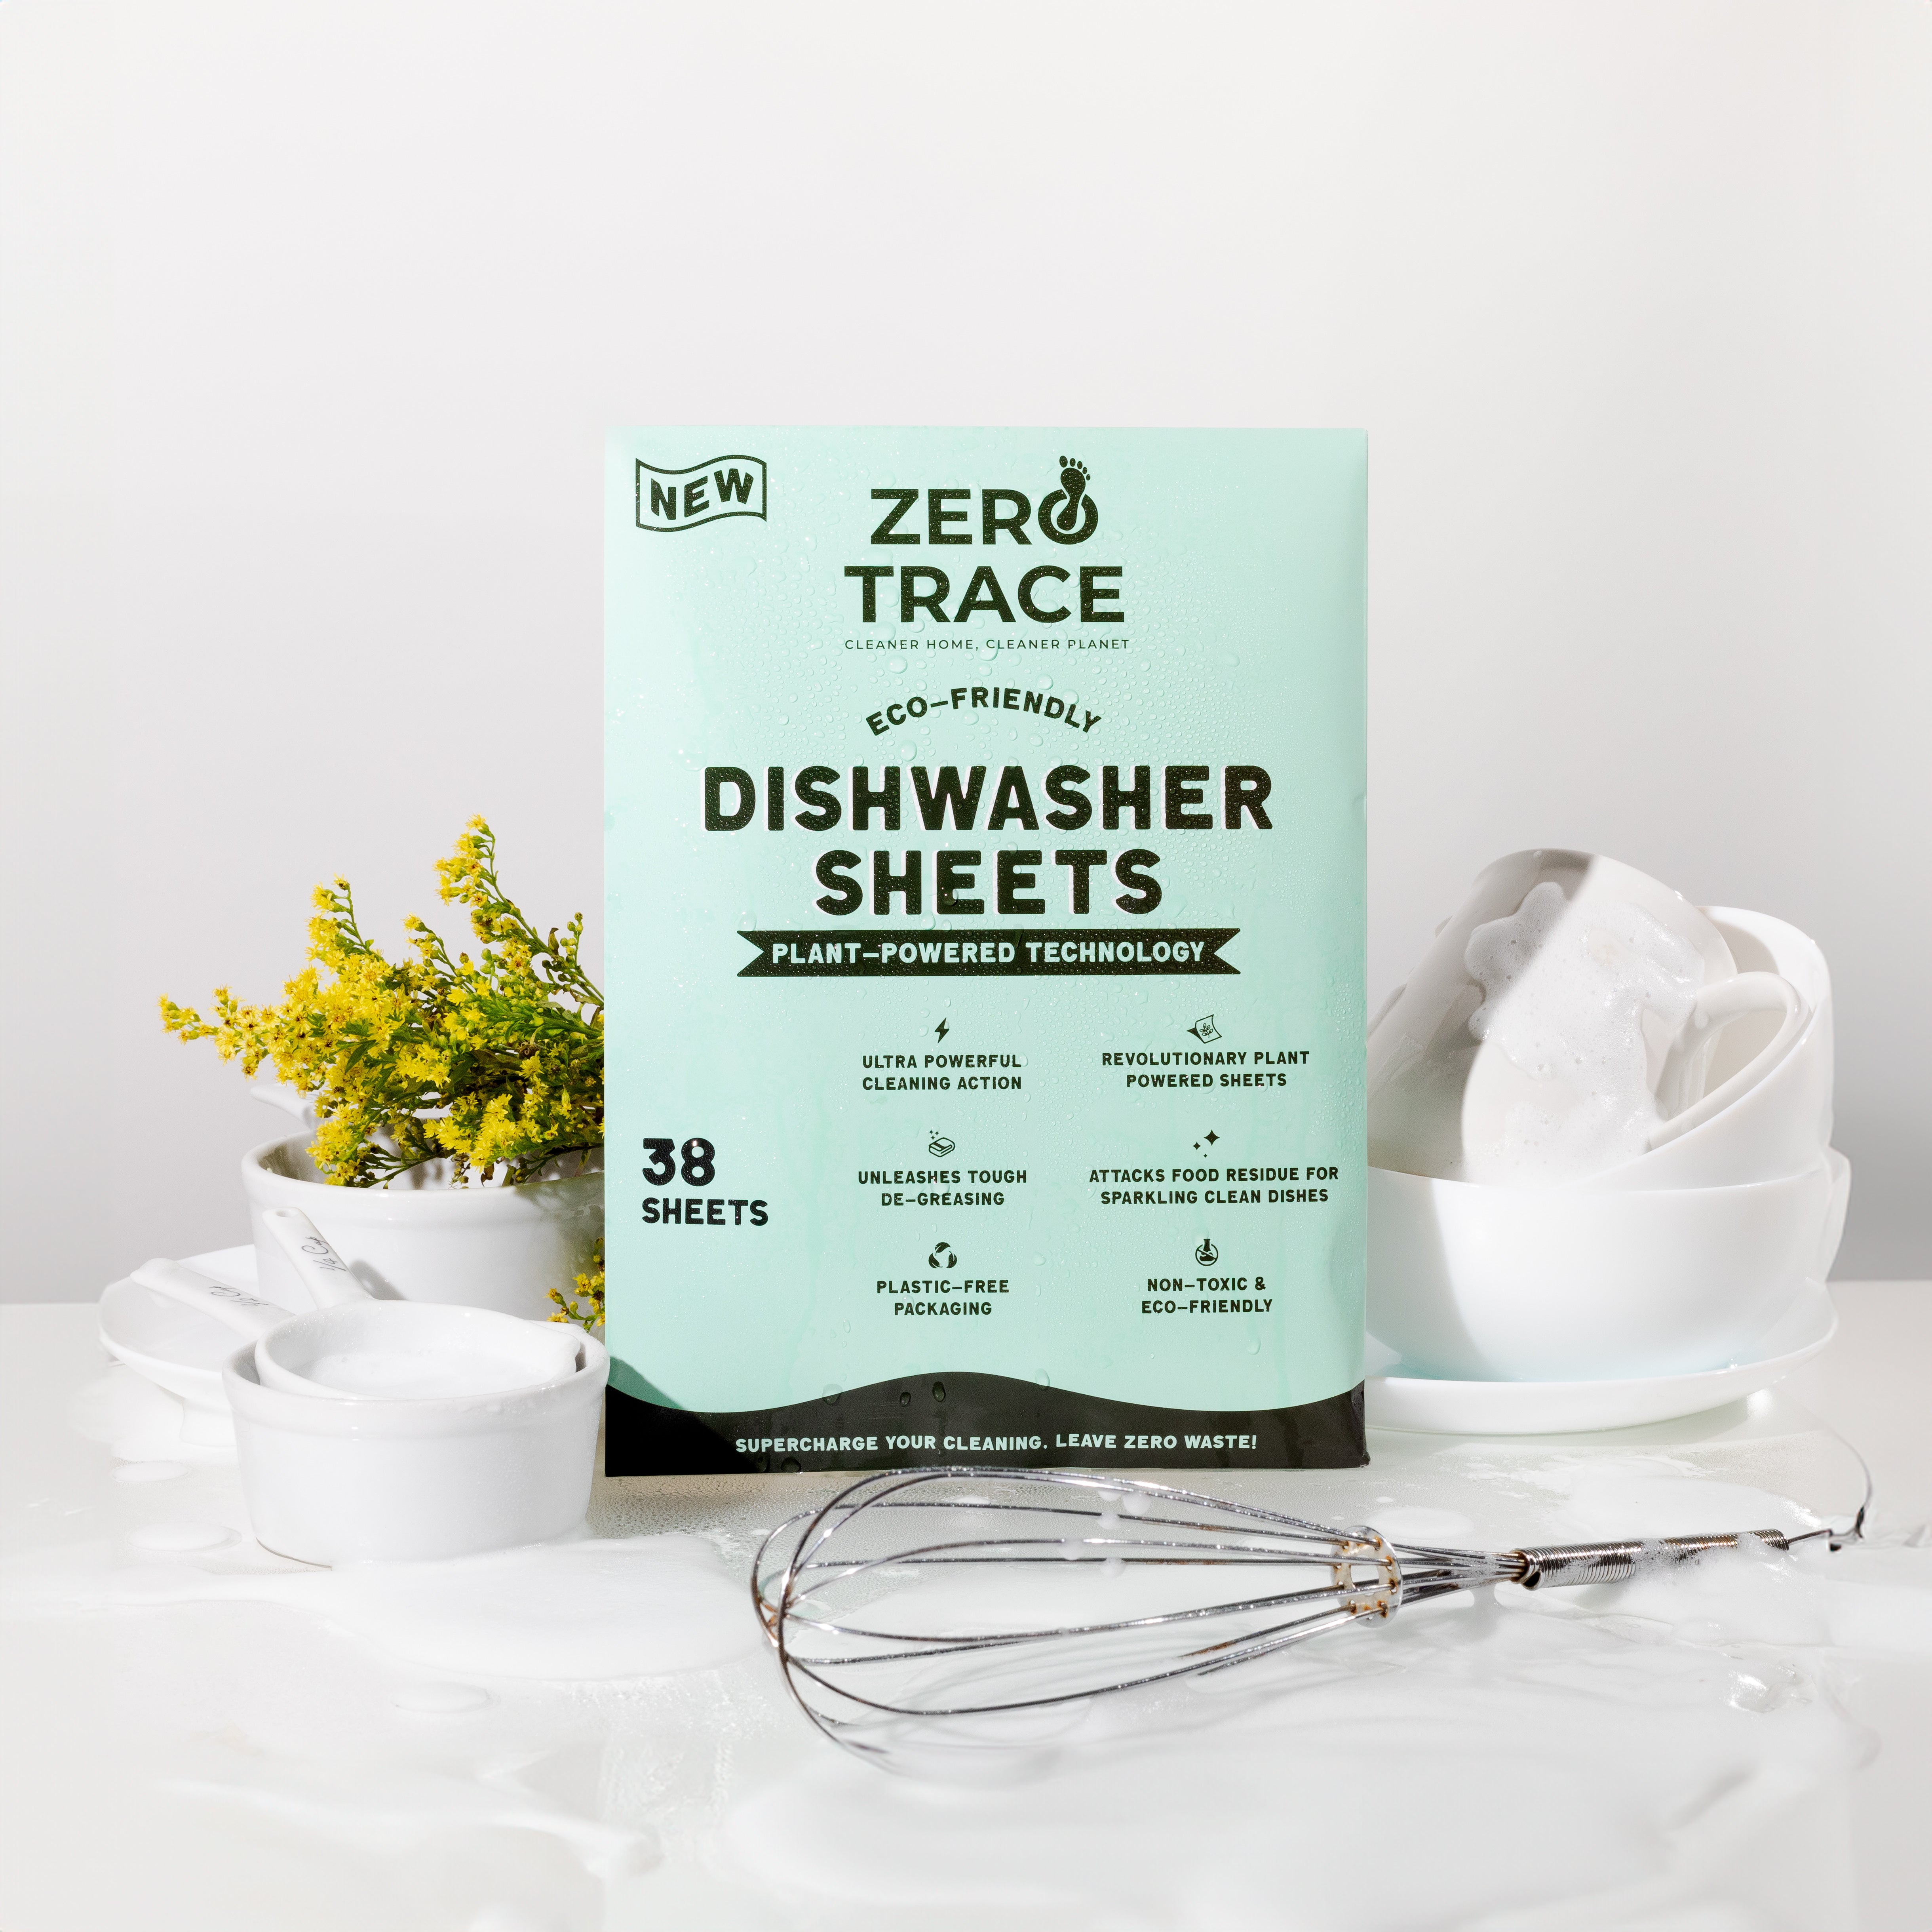 Zero Trace Dish Washer Sheets are an eco-friendly alternative to traditional dishwasher detergents. These convenient sheets can be easily popped into your dishwasher, eliminating the need for messy liquids or powders. By using these Zero Trace Dish Washer Sheets, you can make dishwashing more convenient and environmentally friendly.